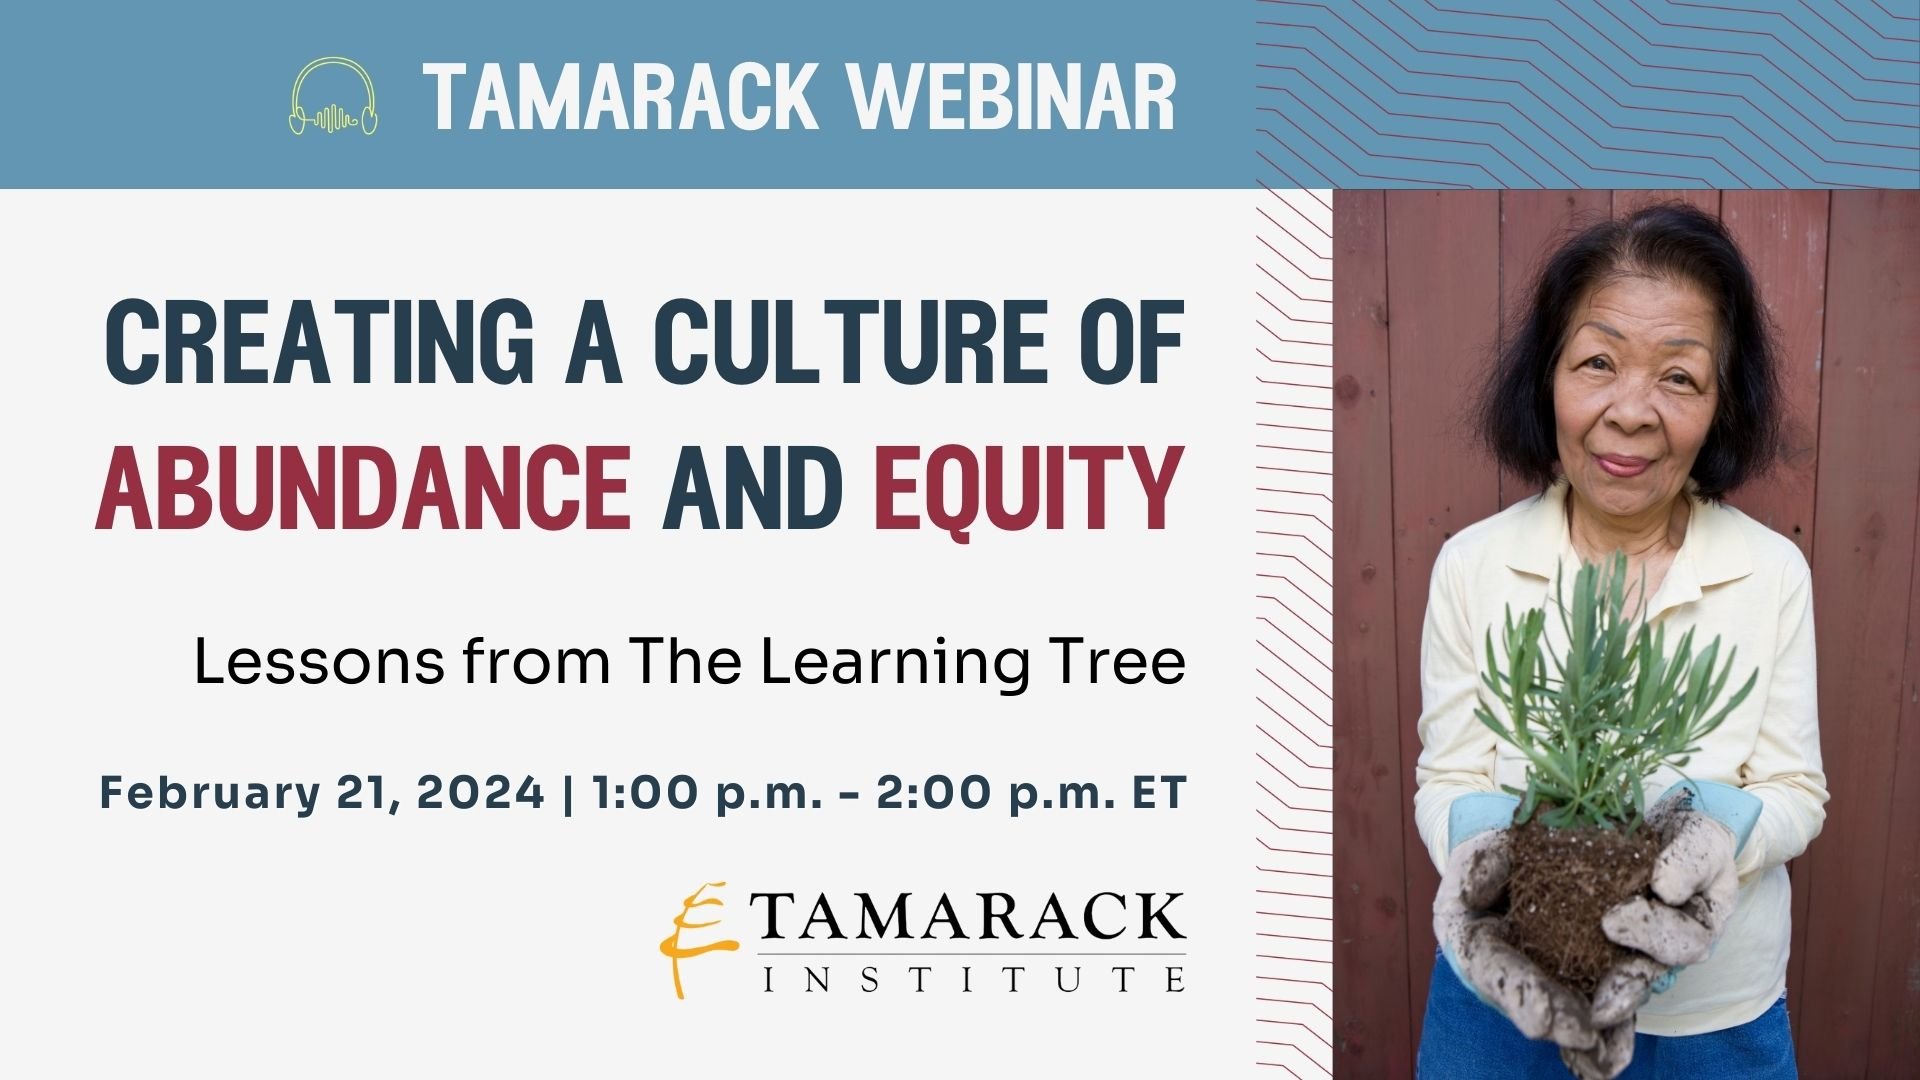 Creating a Culture of Abundance and Equity: Lessons from The Learning Tree